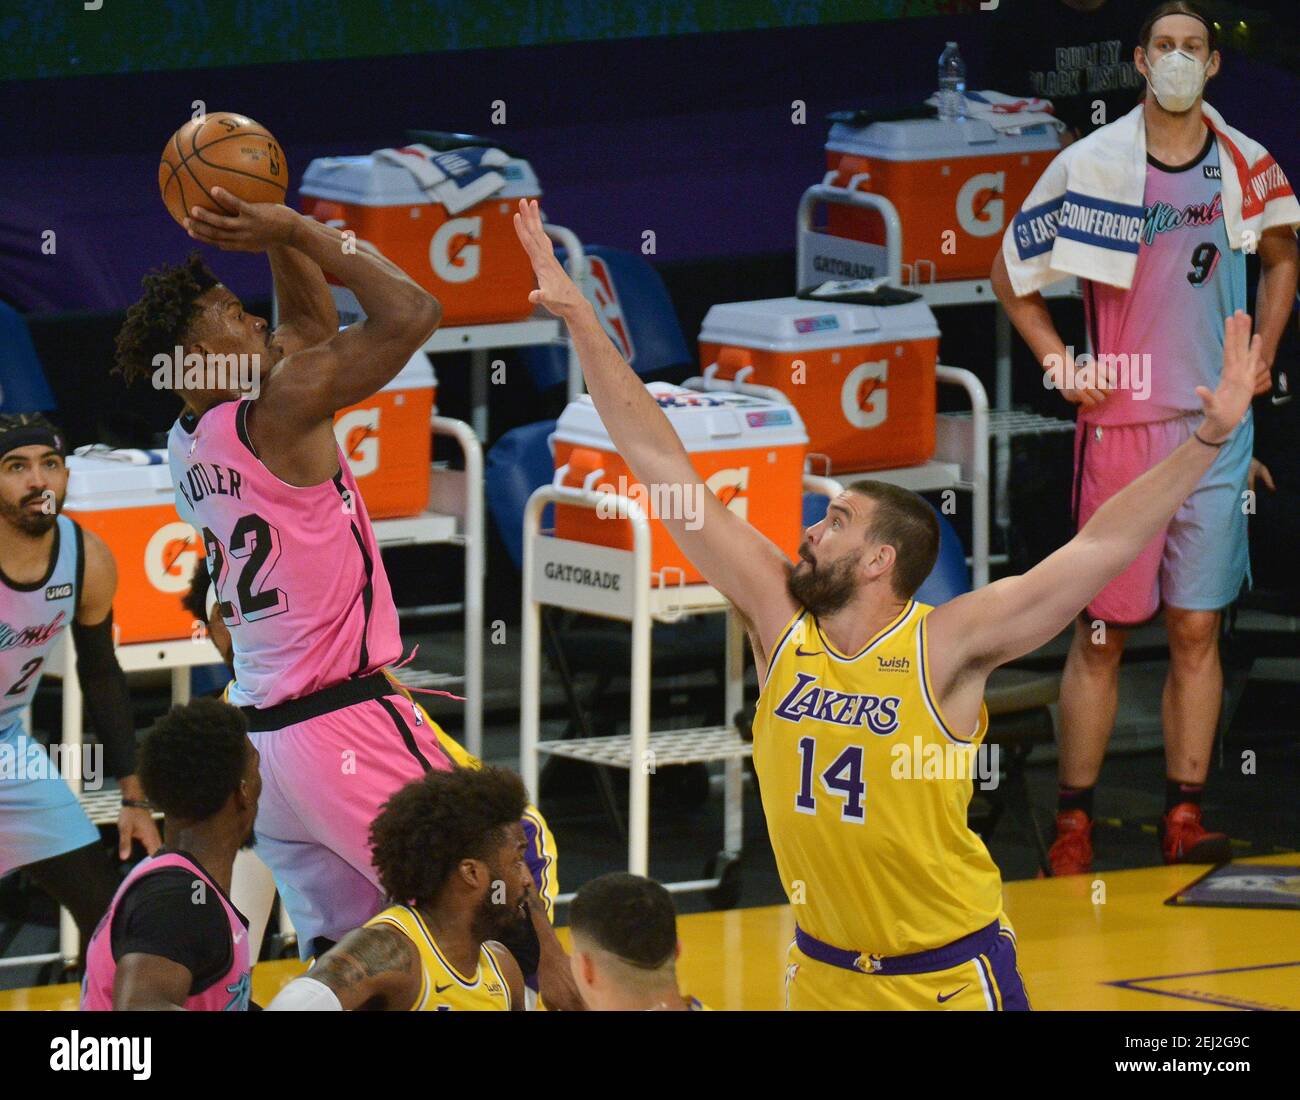 Los Angeles, United States. 20th Feb, 2021. Miami Heat guard Jimmy Butler shoots over Los Angeles Lakers' center Marc Gasol during the first half at Staples Center in Los Angeles on Saturday, February 20, 2021. The Heat defeated the Lakers 96-94. Photo by Jim Ruymen/UPI Credit: UPI/Alamy Live News Stock Photo